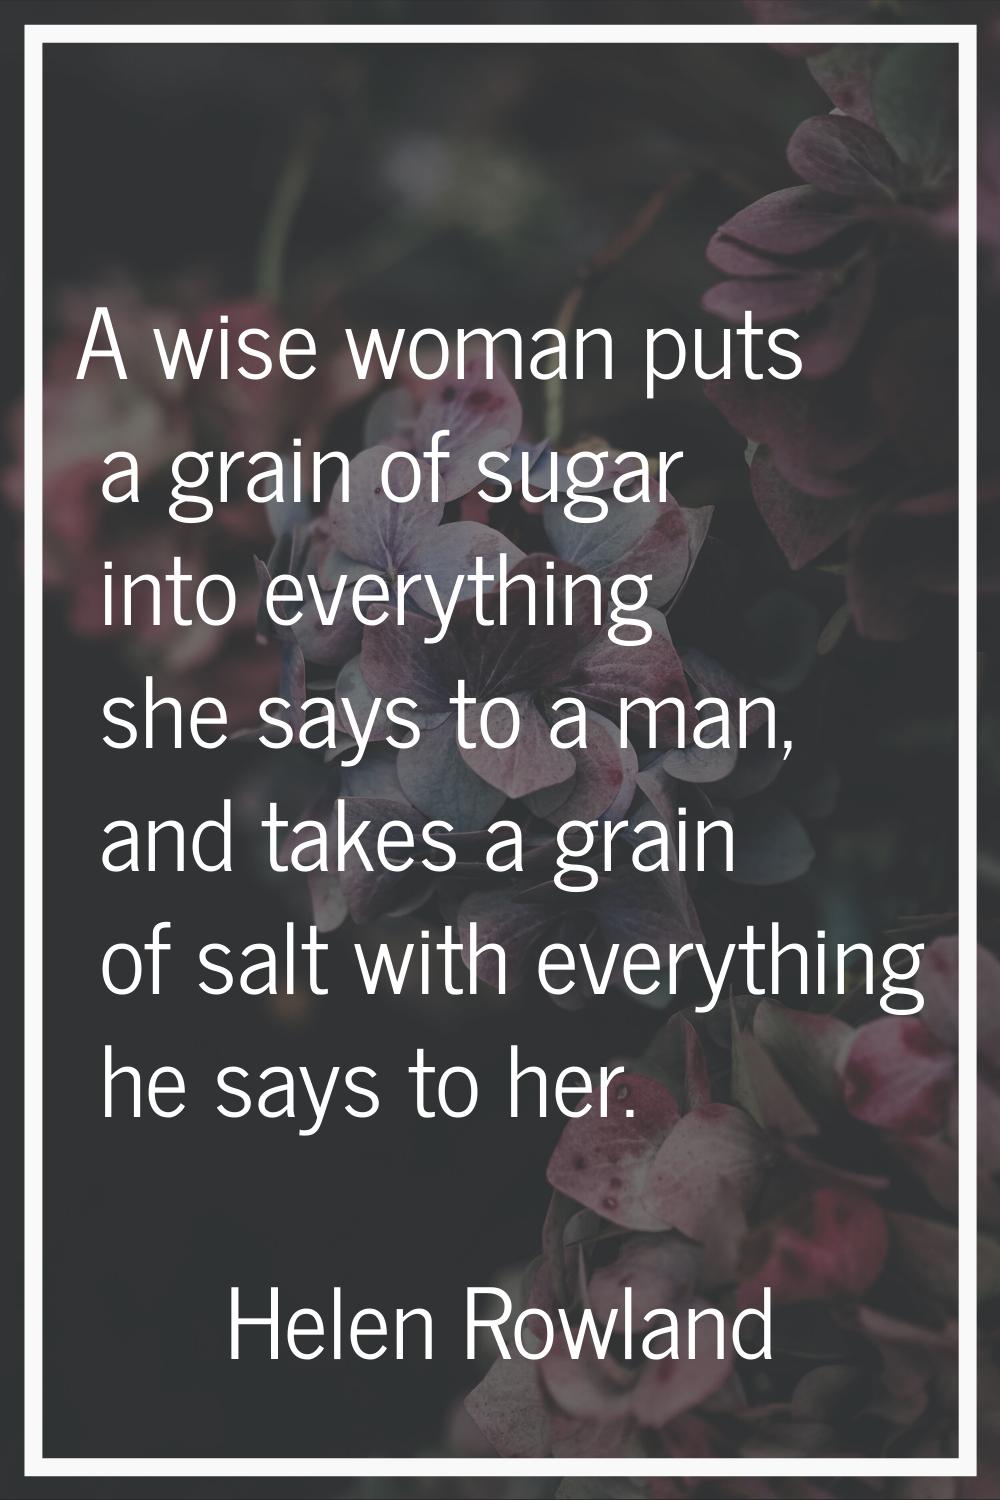 A wise woman puts a grain of sugar into everything she says to a man, and takes a grain of salt wit